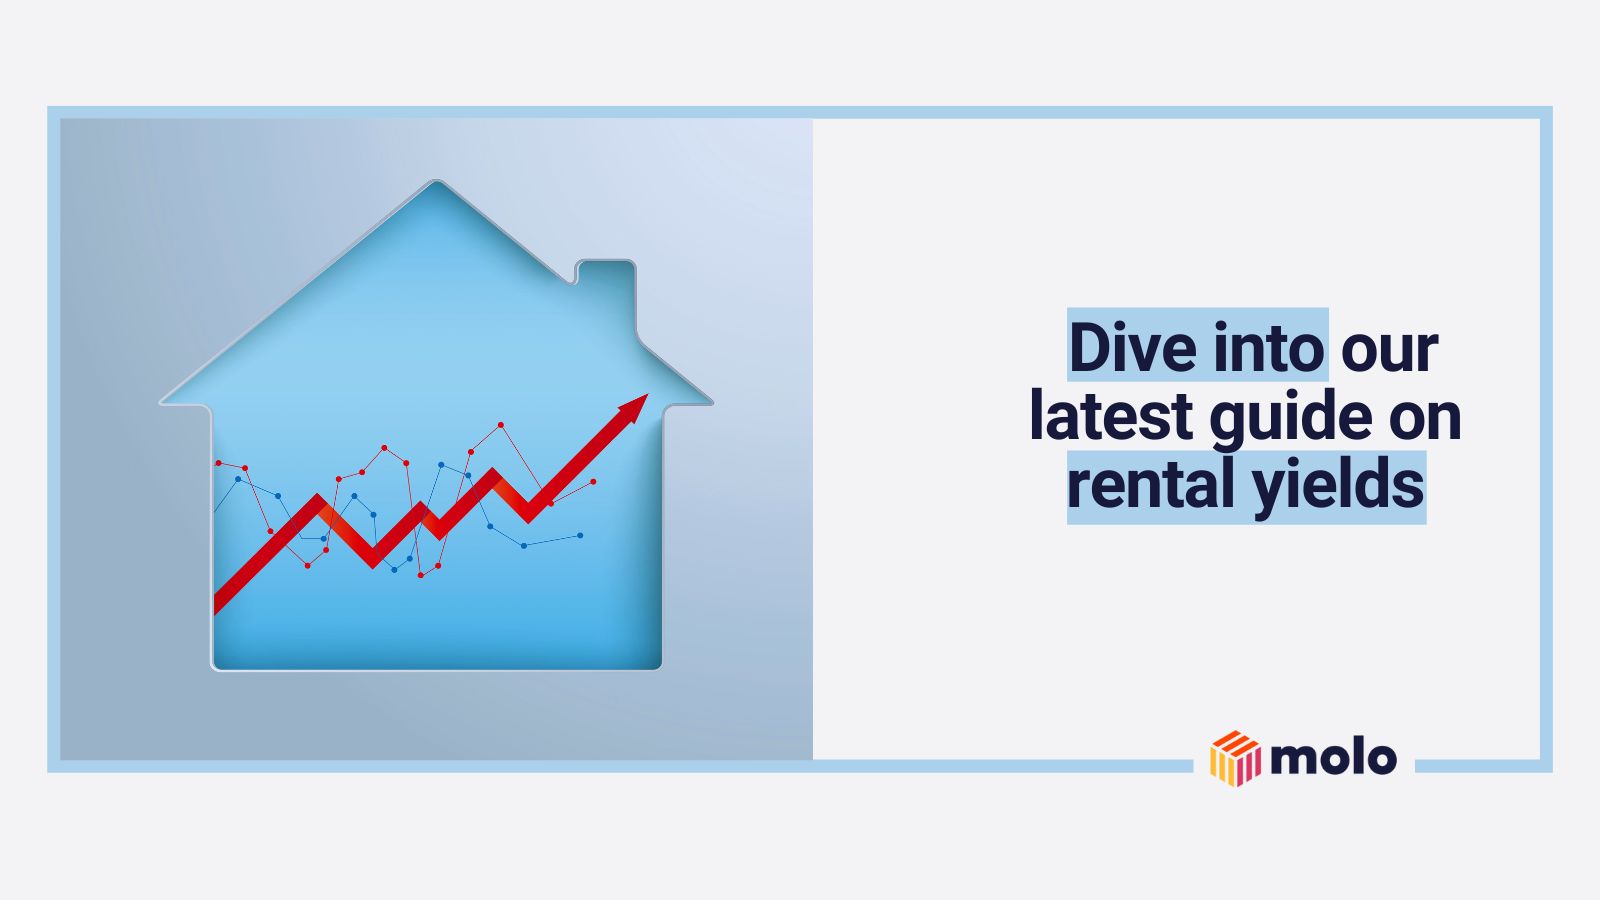 what is rental yield? Dive into our latest guide on rental yields